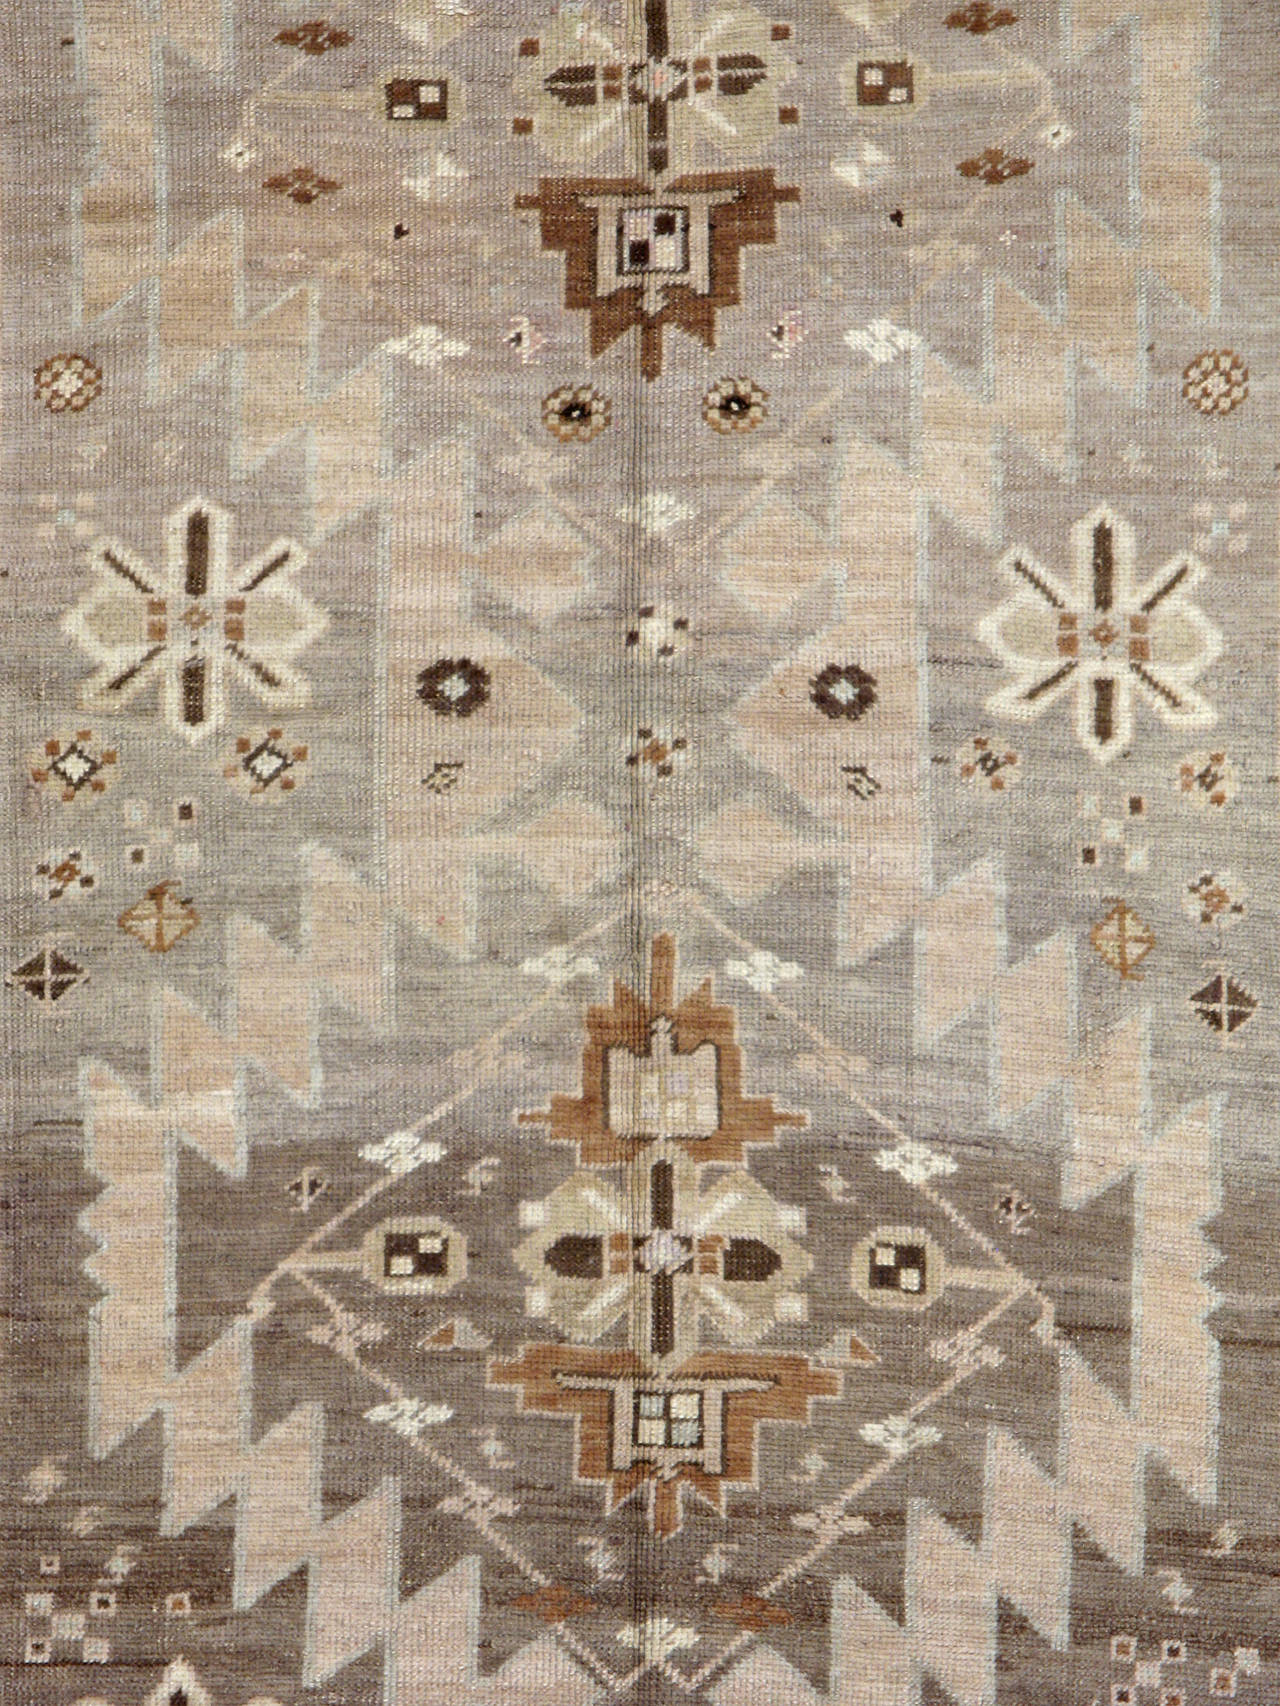 An antique Russian Karabagh gallery carpet from the first quarter of the 20th century.